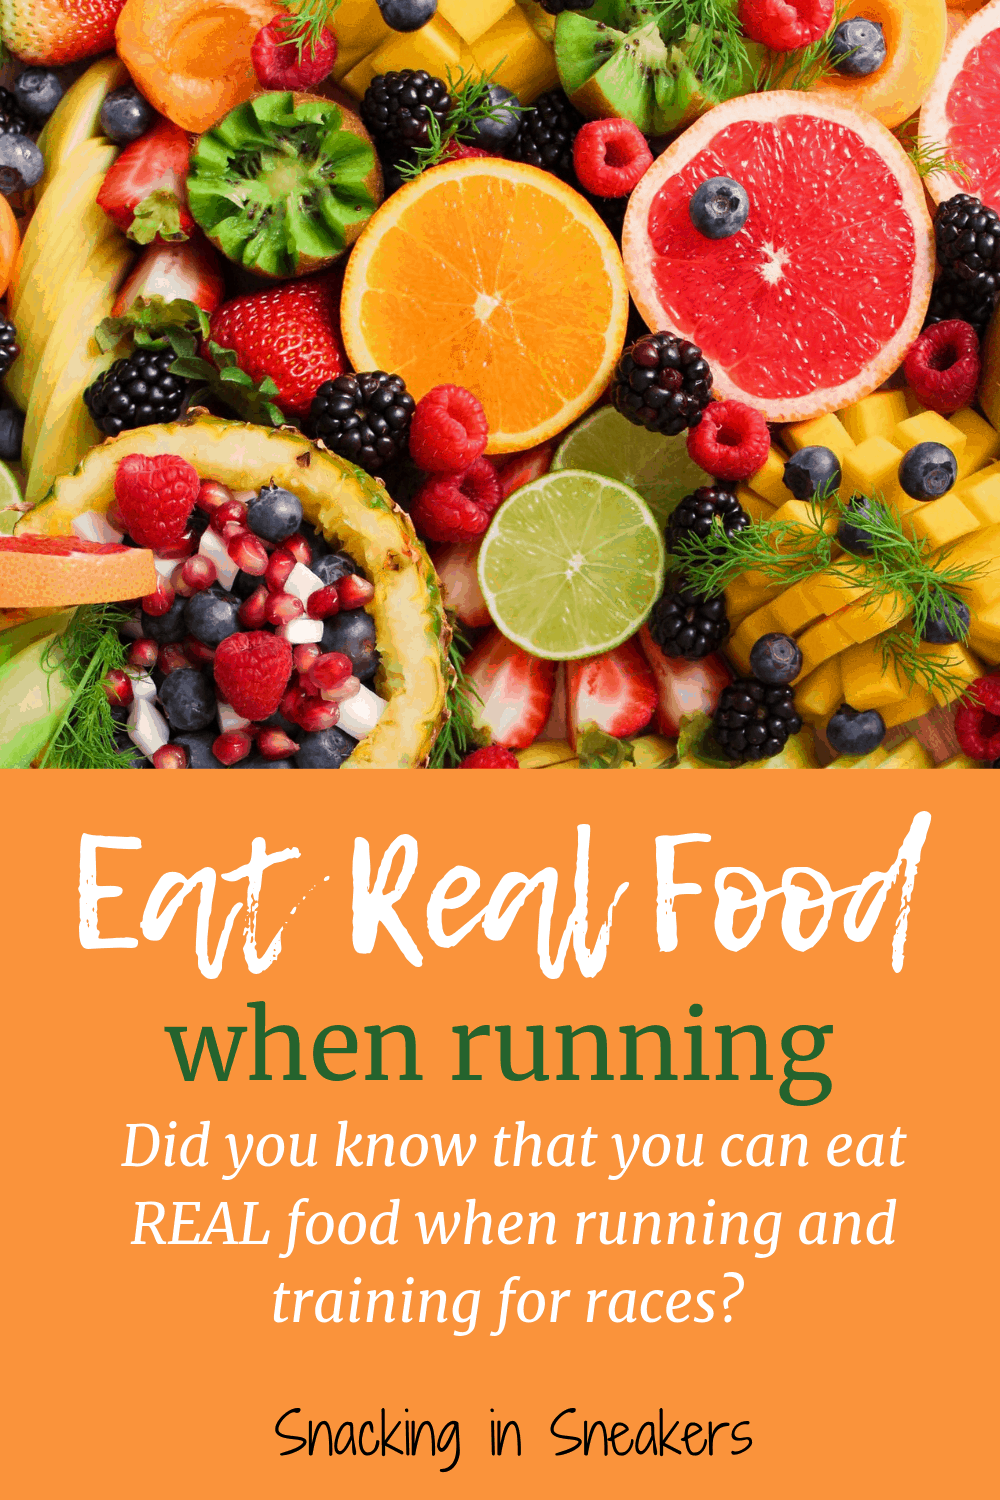 What To Eat While Running Is Real Food An Option Snacking In Sneakers 9558